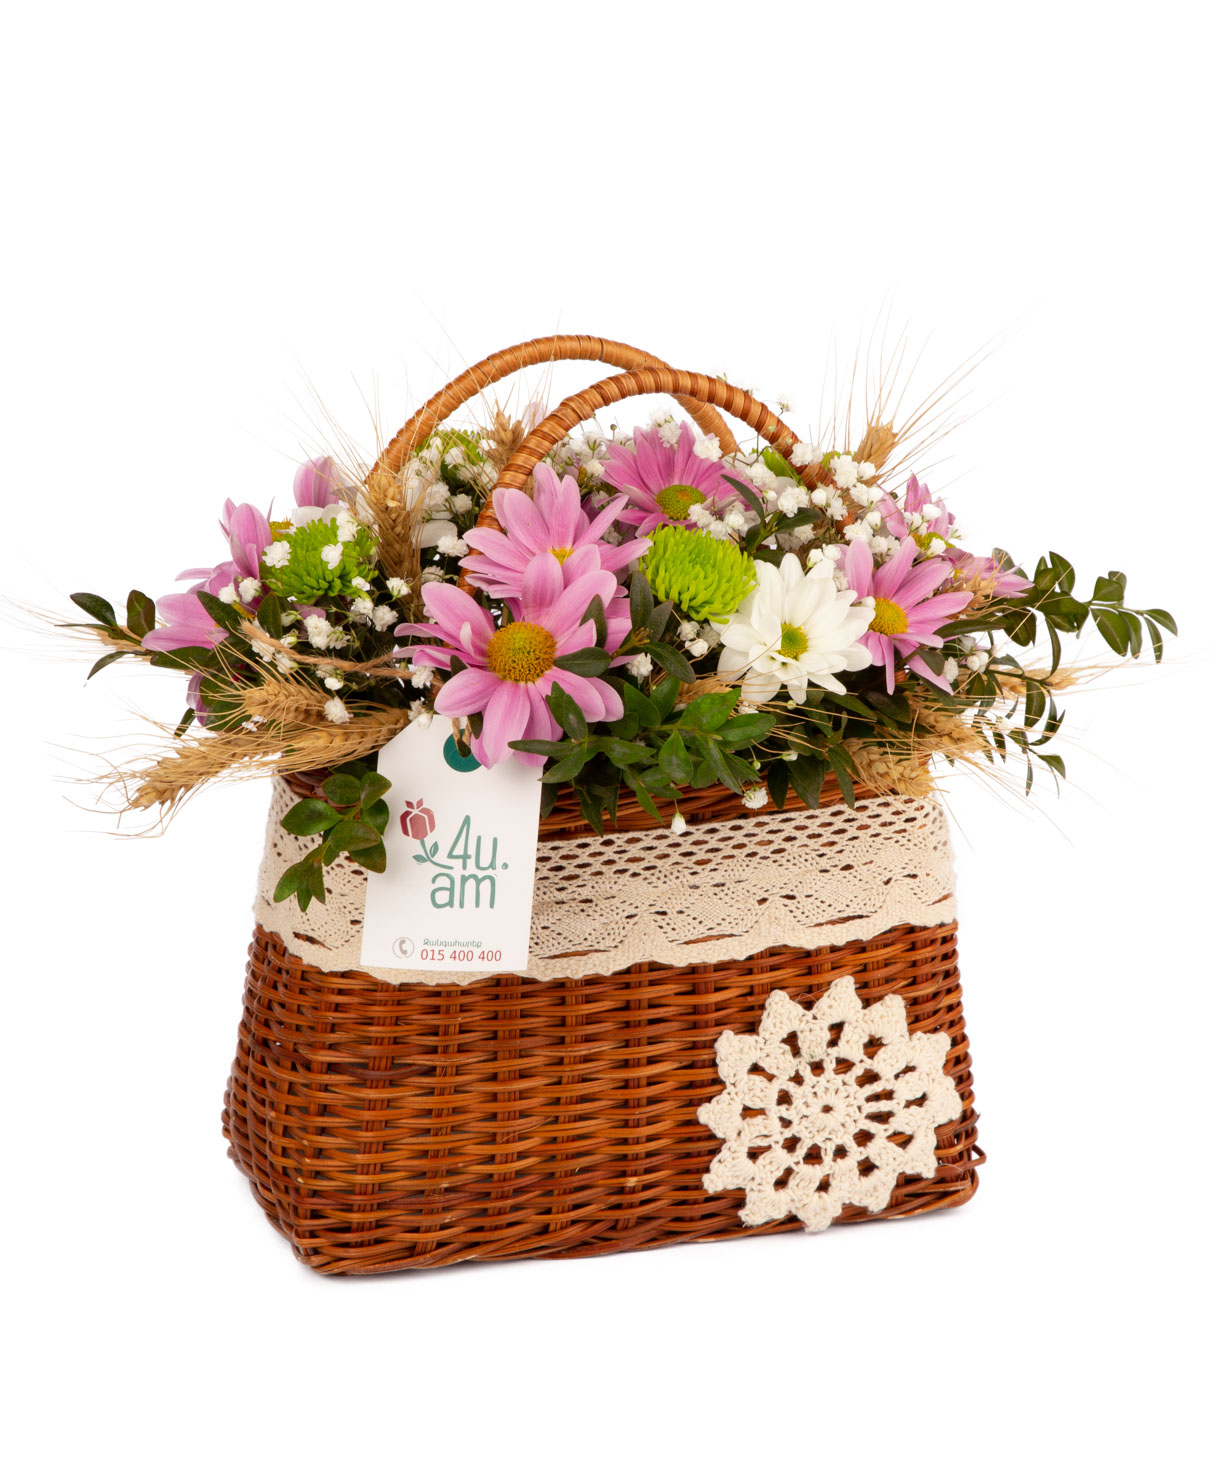 Composition `Novi` with chrysanthemums, gypsophilas and wheat ears